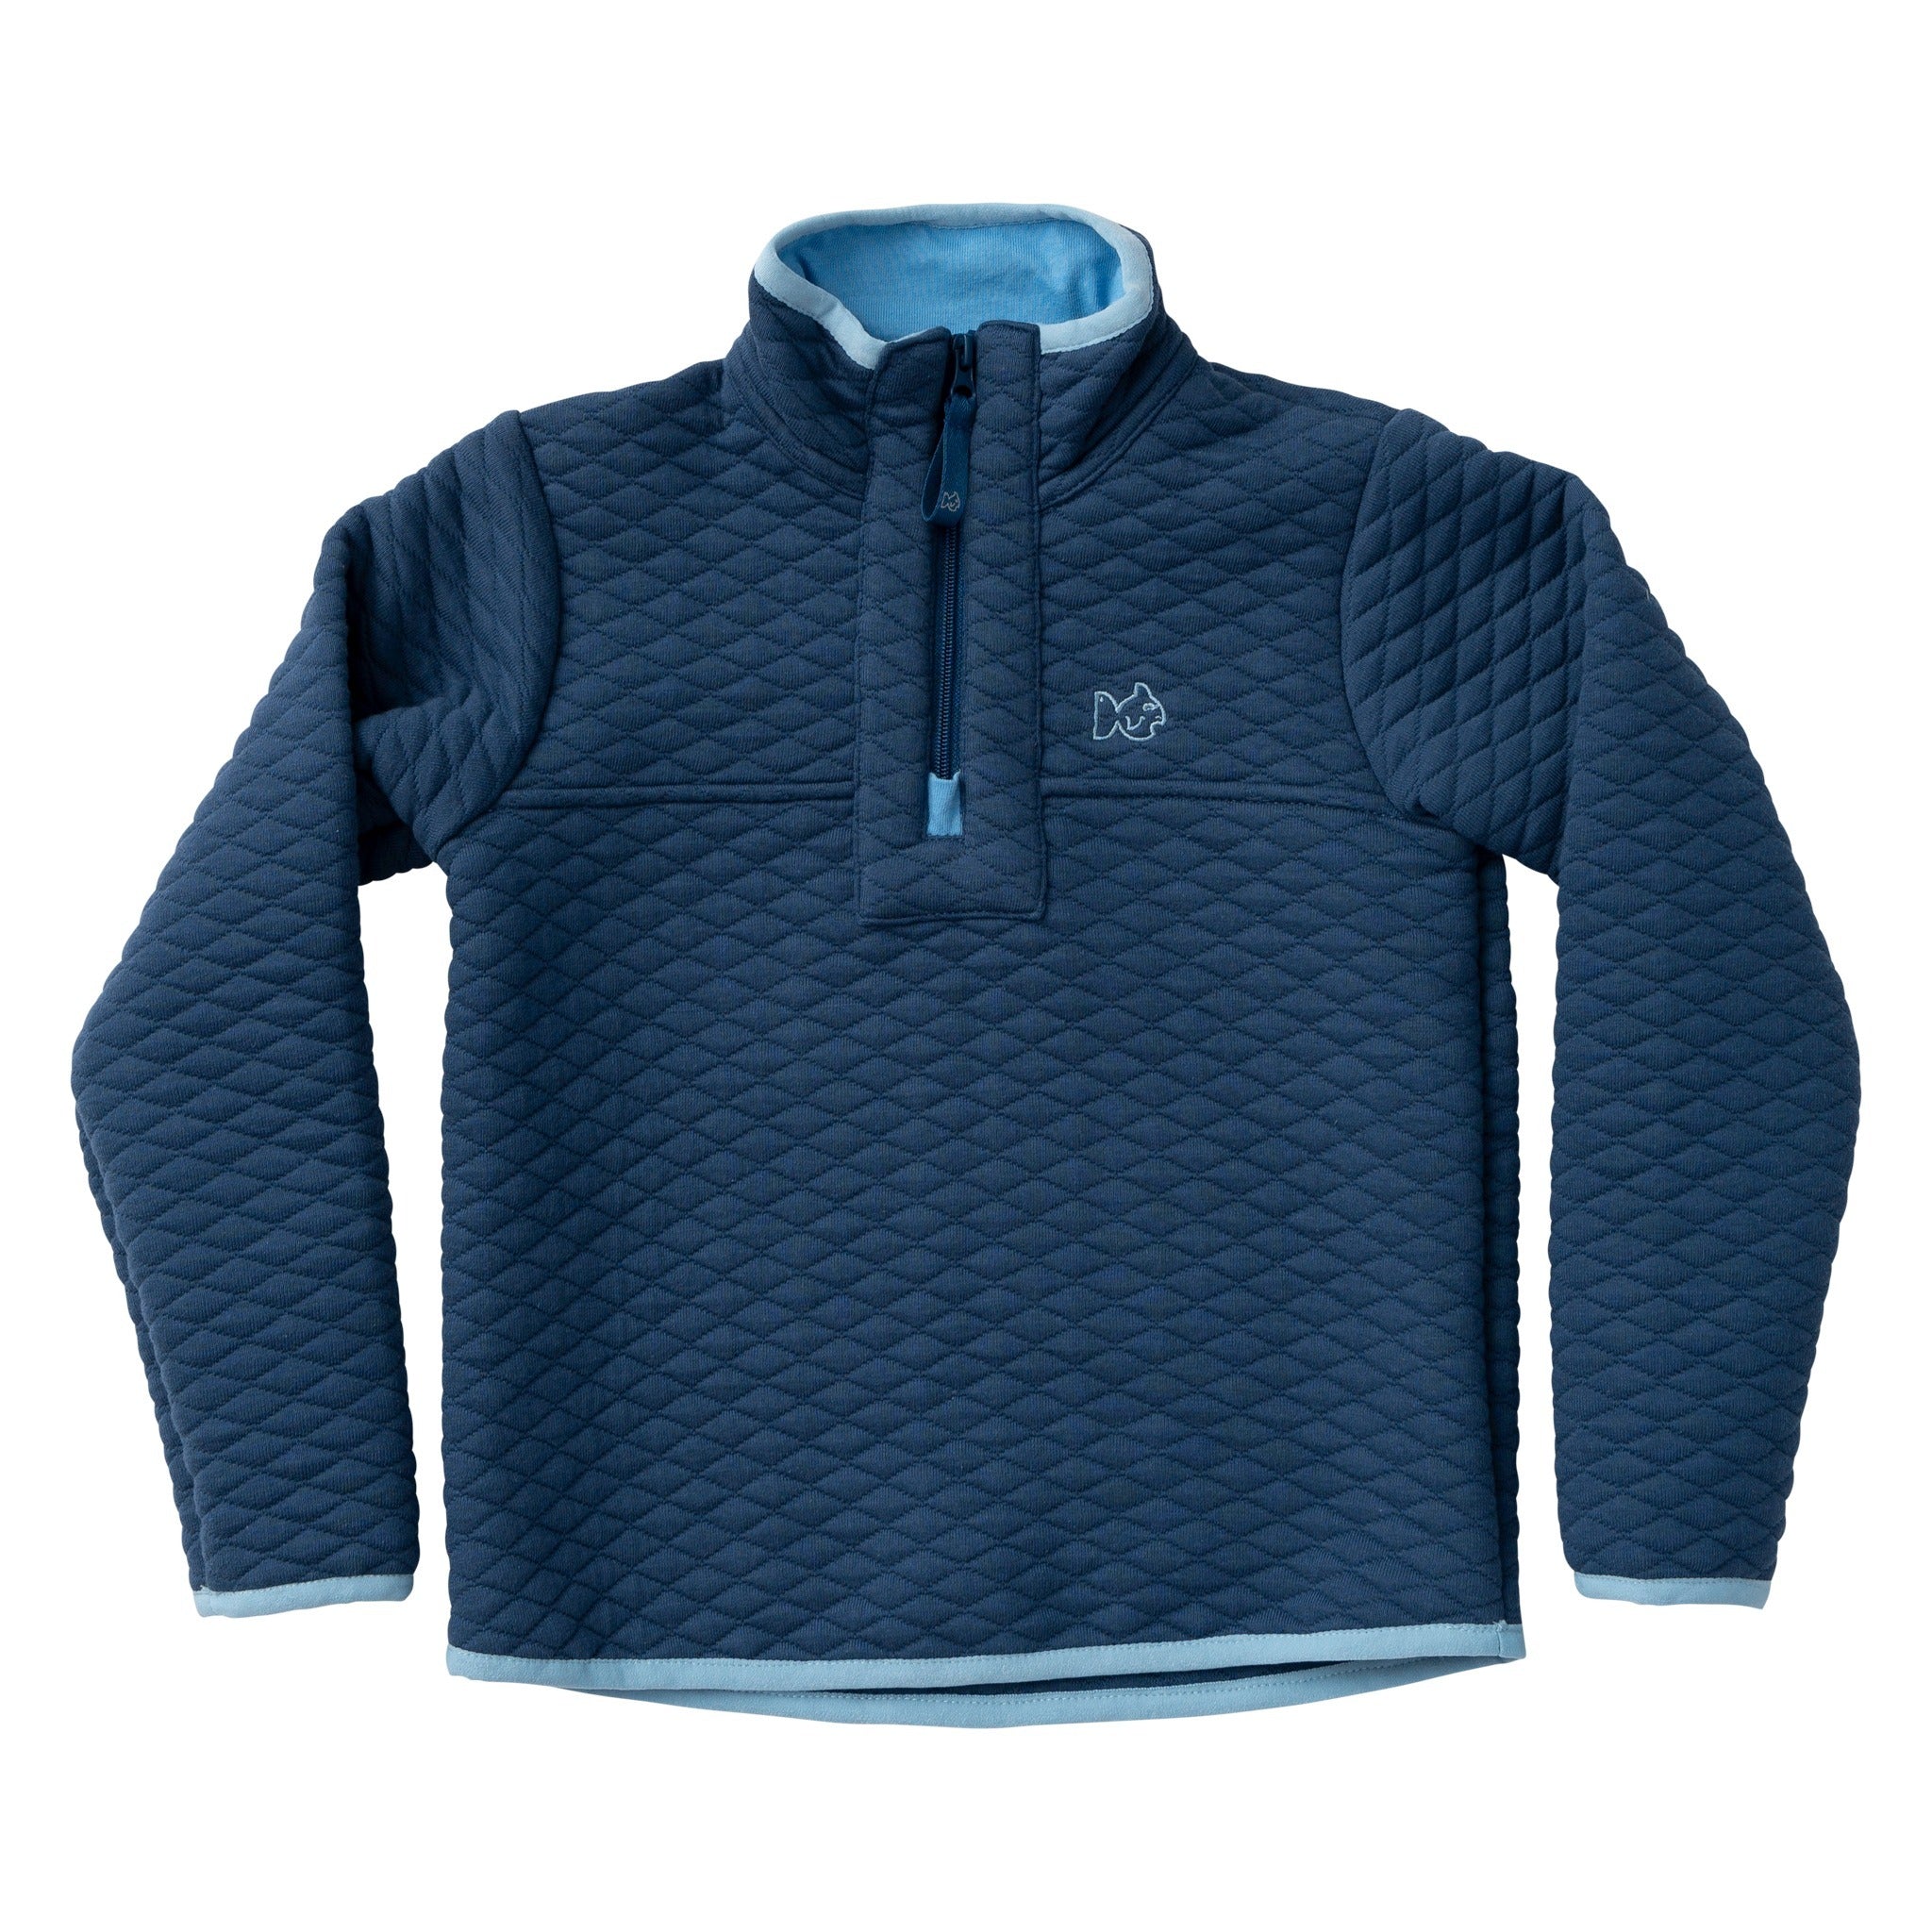 Quilted Zip Pullover - Moonlight Blue  (2T,3T,4T,5,6,8/10)